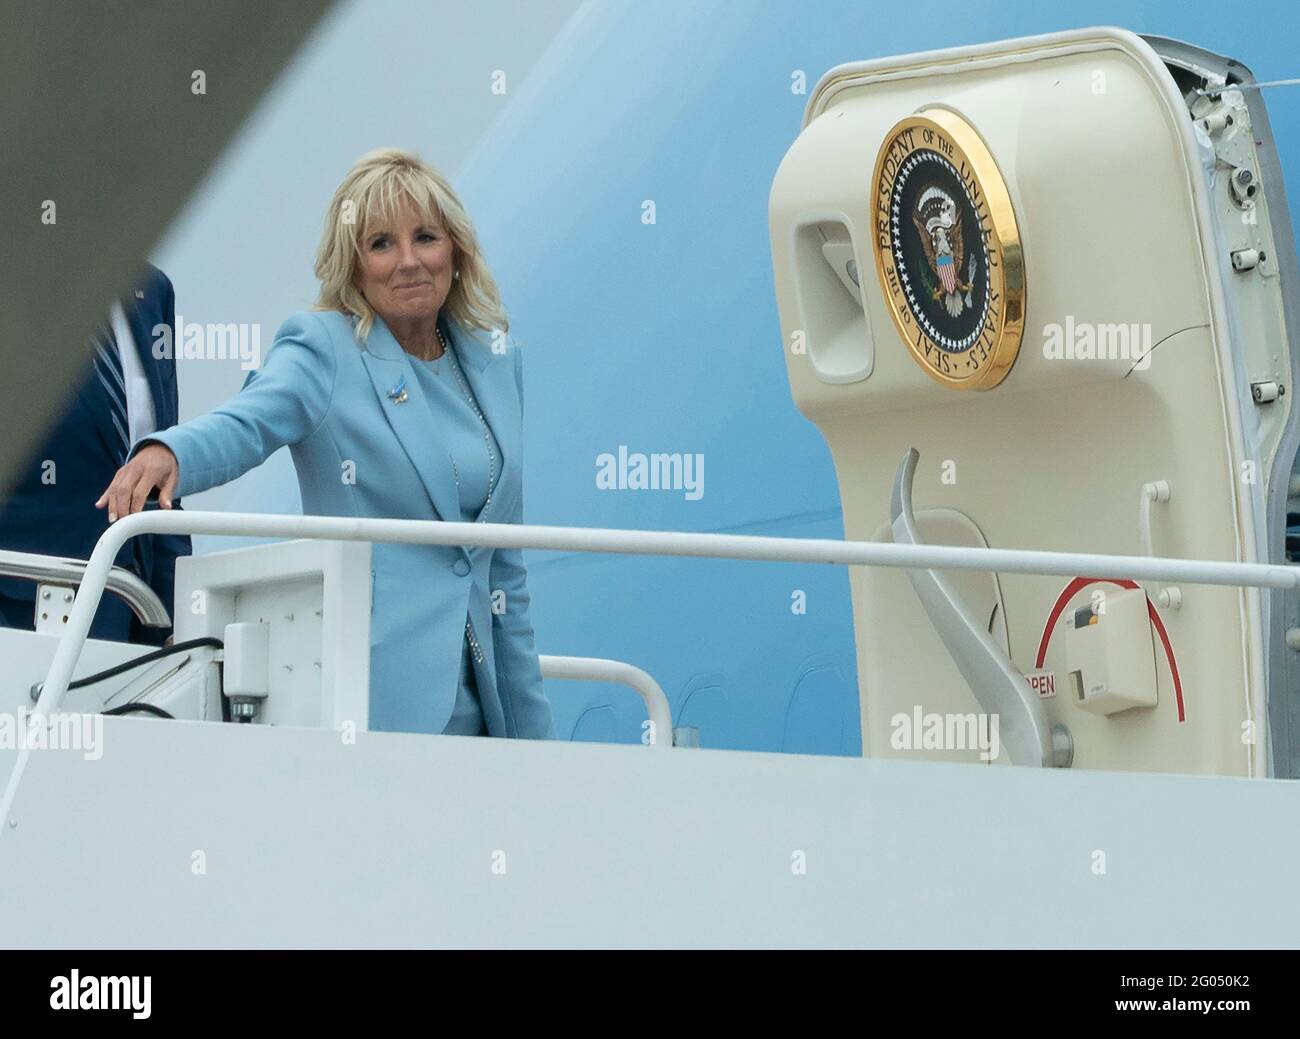 First lady Dr. Jill Biden boards Air Force One at Joint Base Andrews, to make remarks at Joint Base Langley-Eustis in Virginia, Friday, May 28, 2021. Credit: Chris Kleponis/Pool via CNP/AdMedia/Newscom/Alamy Live News Stock Photo